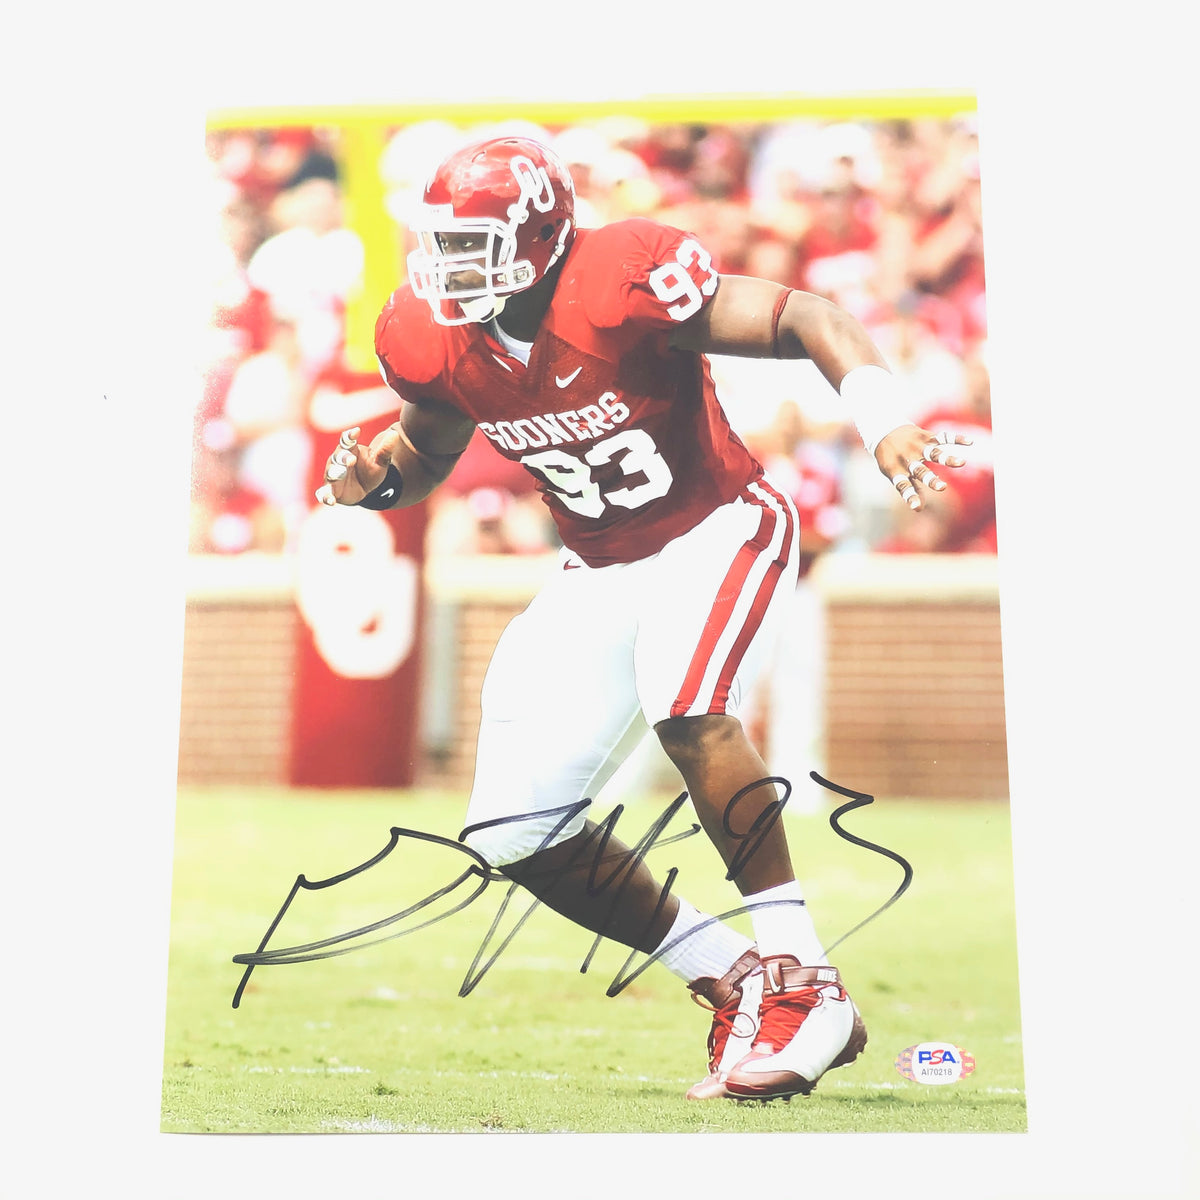 Spencer Rattler Autographed Oklahoma Sooners 11x14 Photo